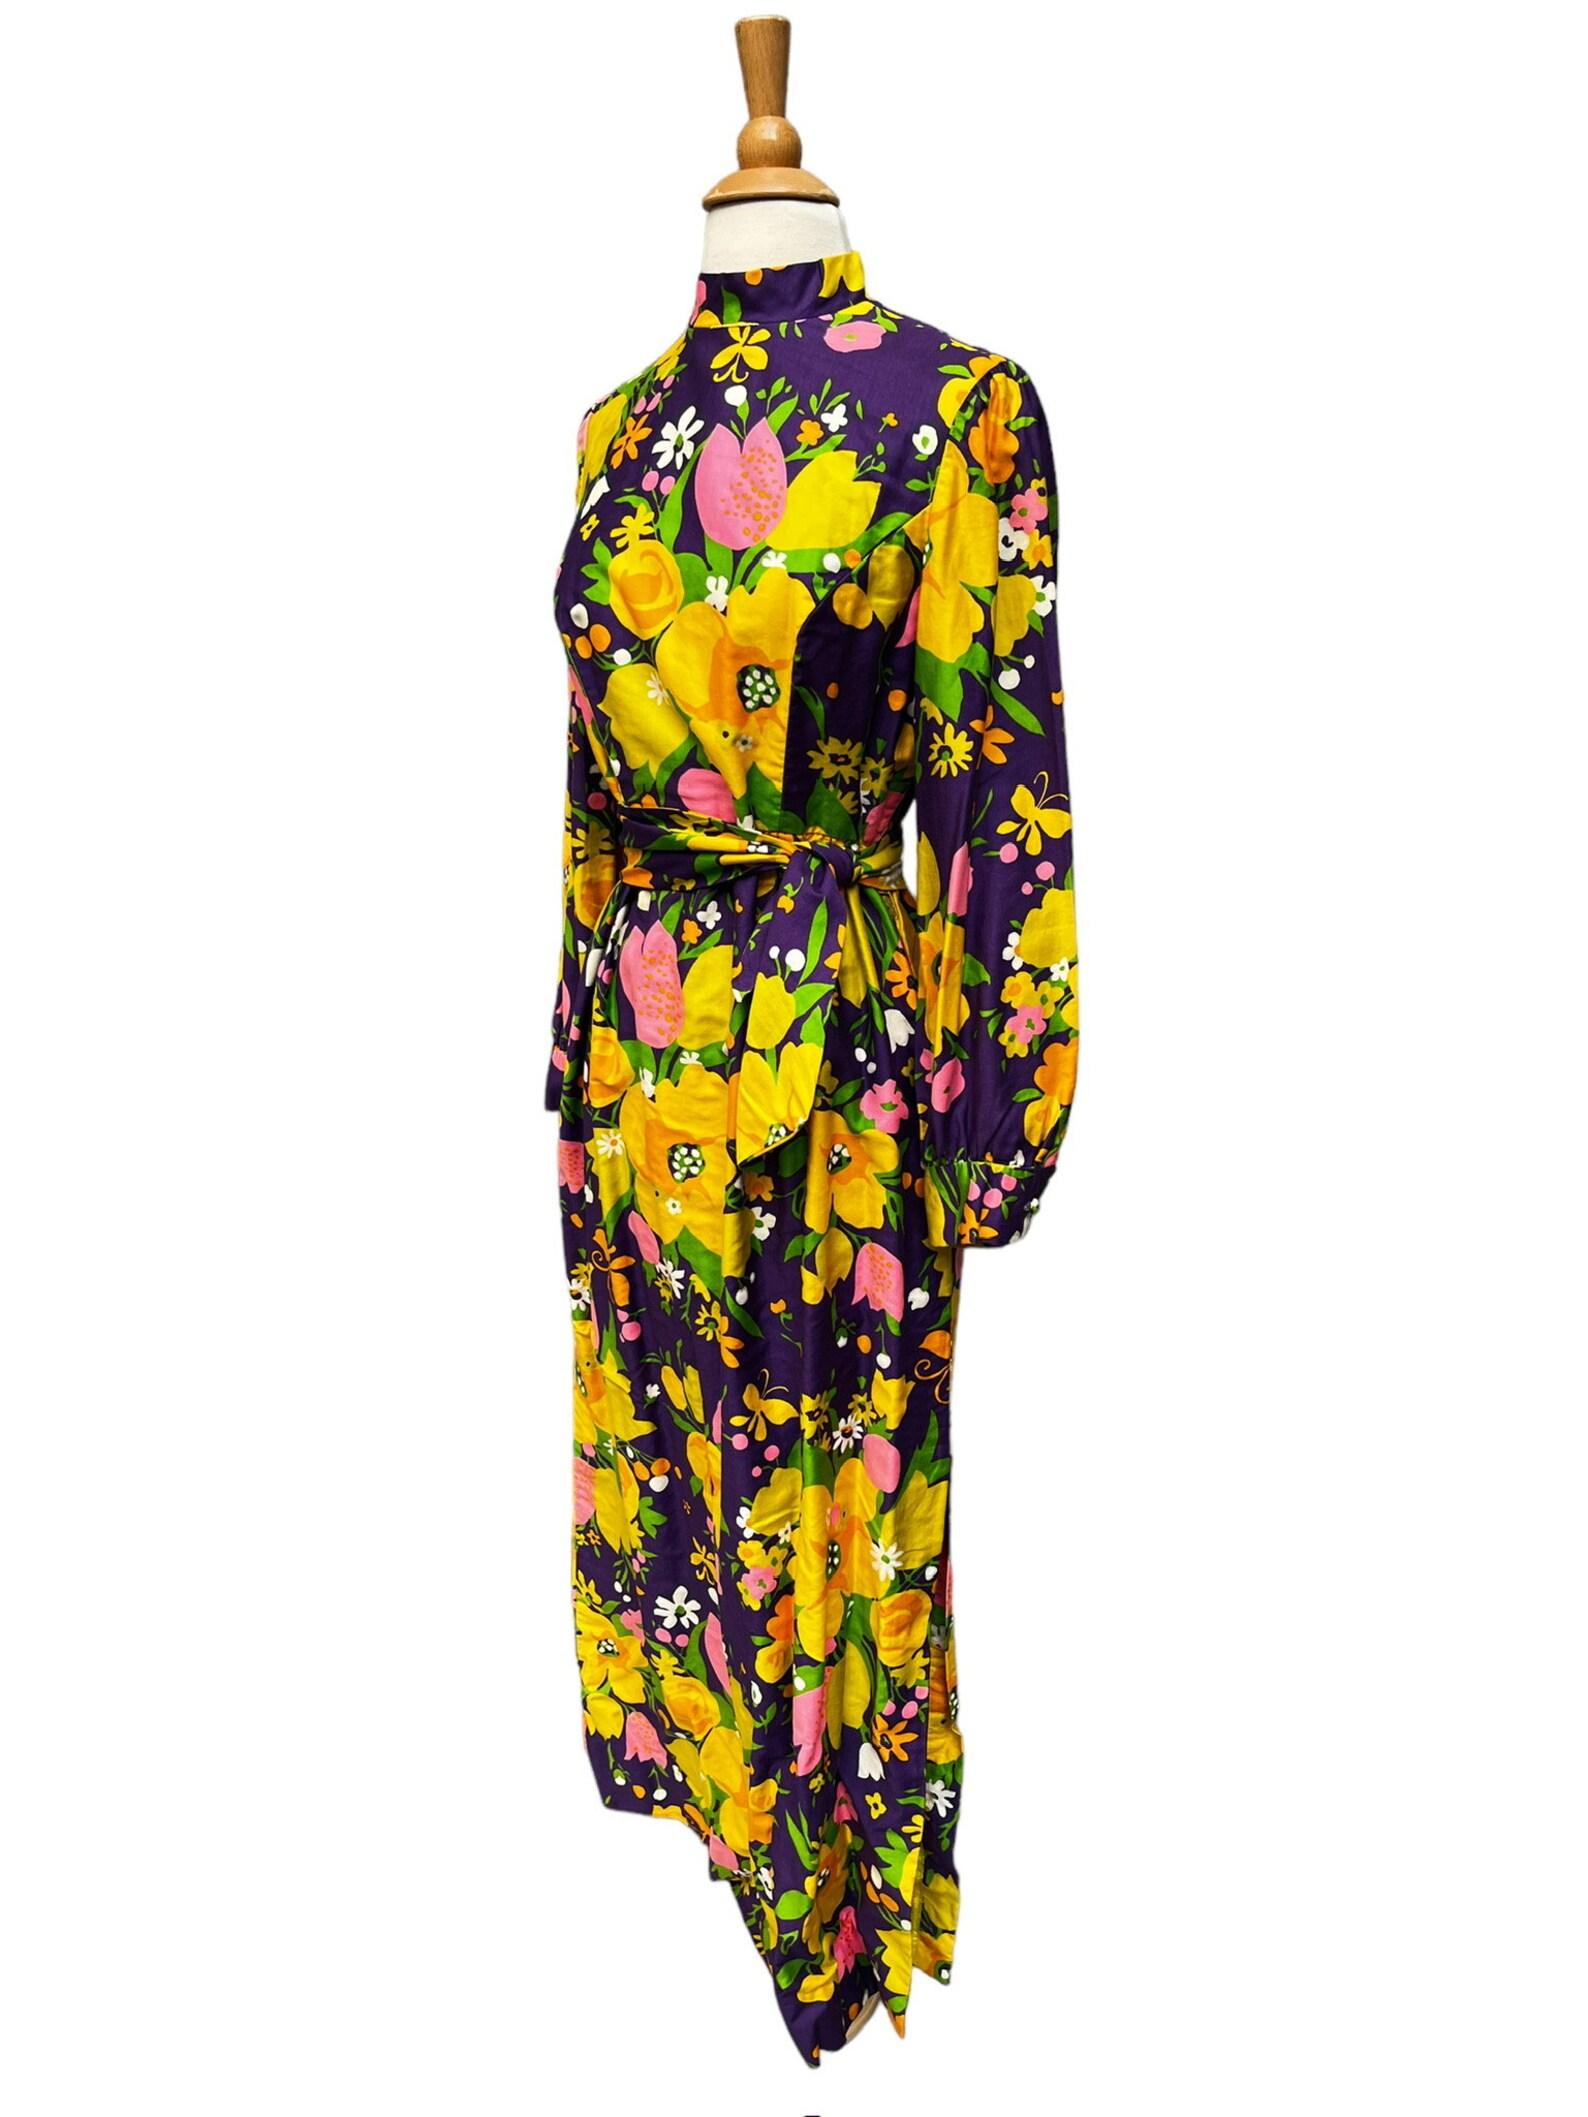 Brenner Couture Floral Maxi Dress, Circa 1970s For Sale 1